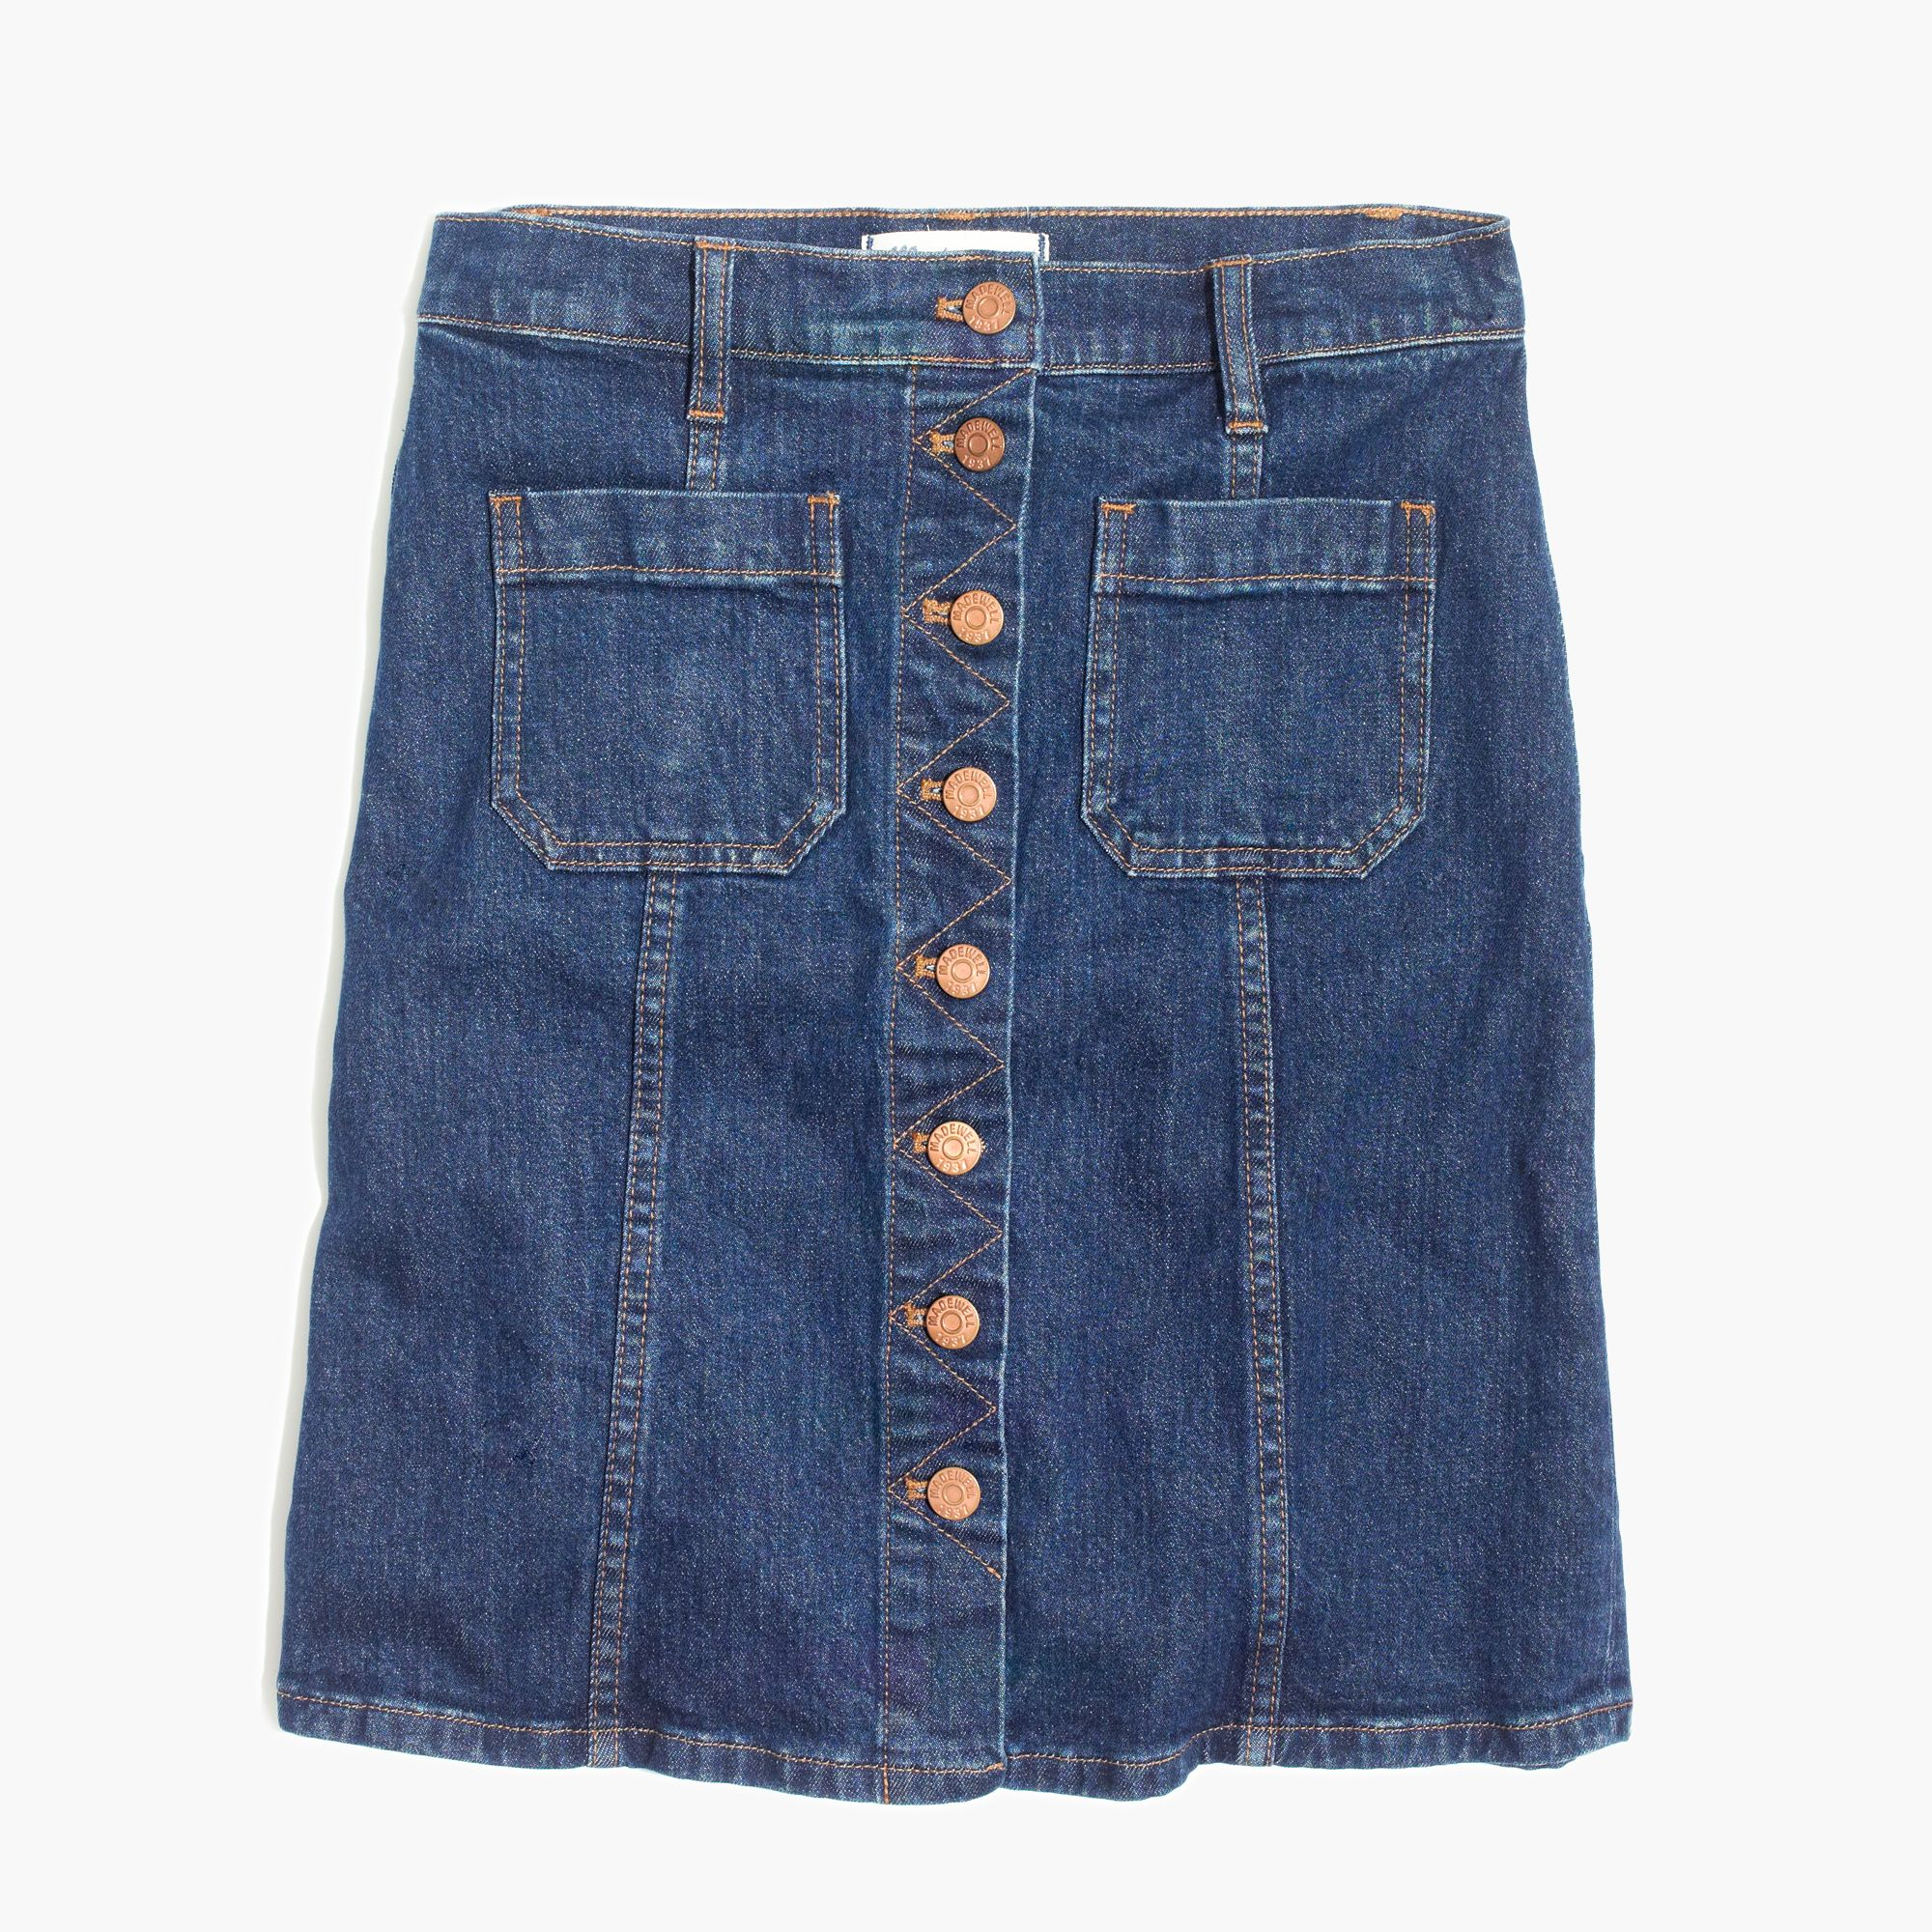 Madewell Denim Button-front Skirt in Blue - Lyst